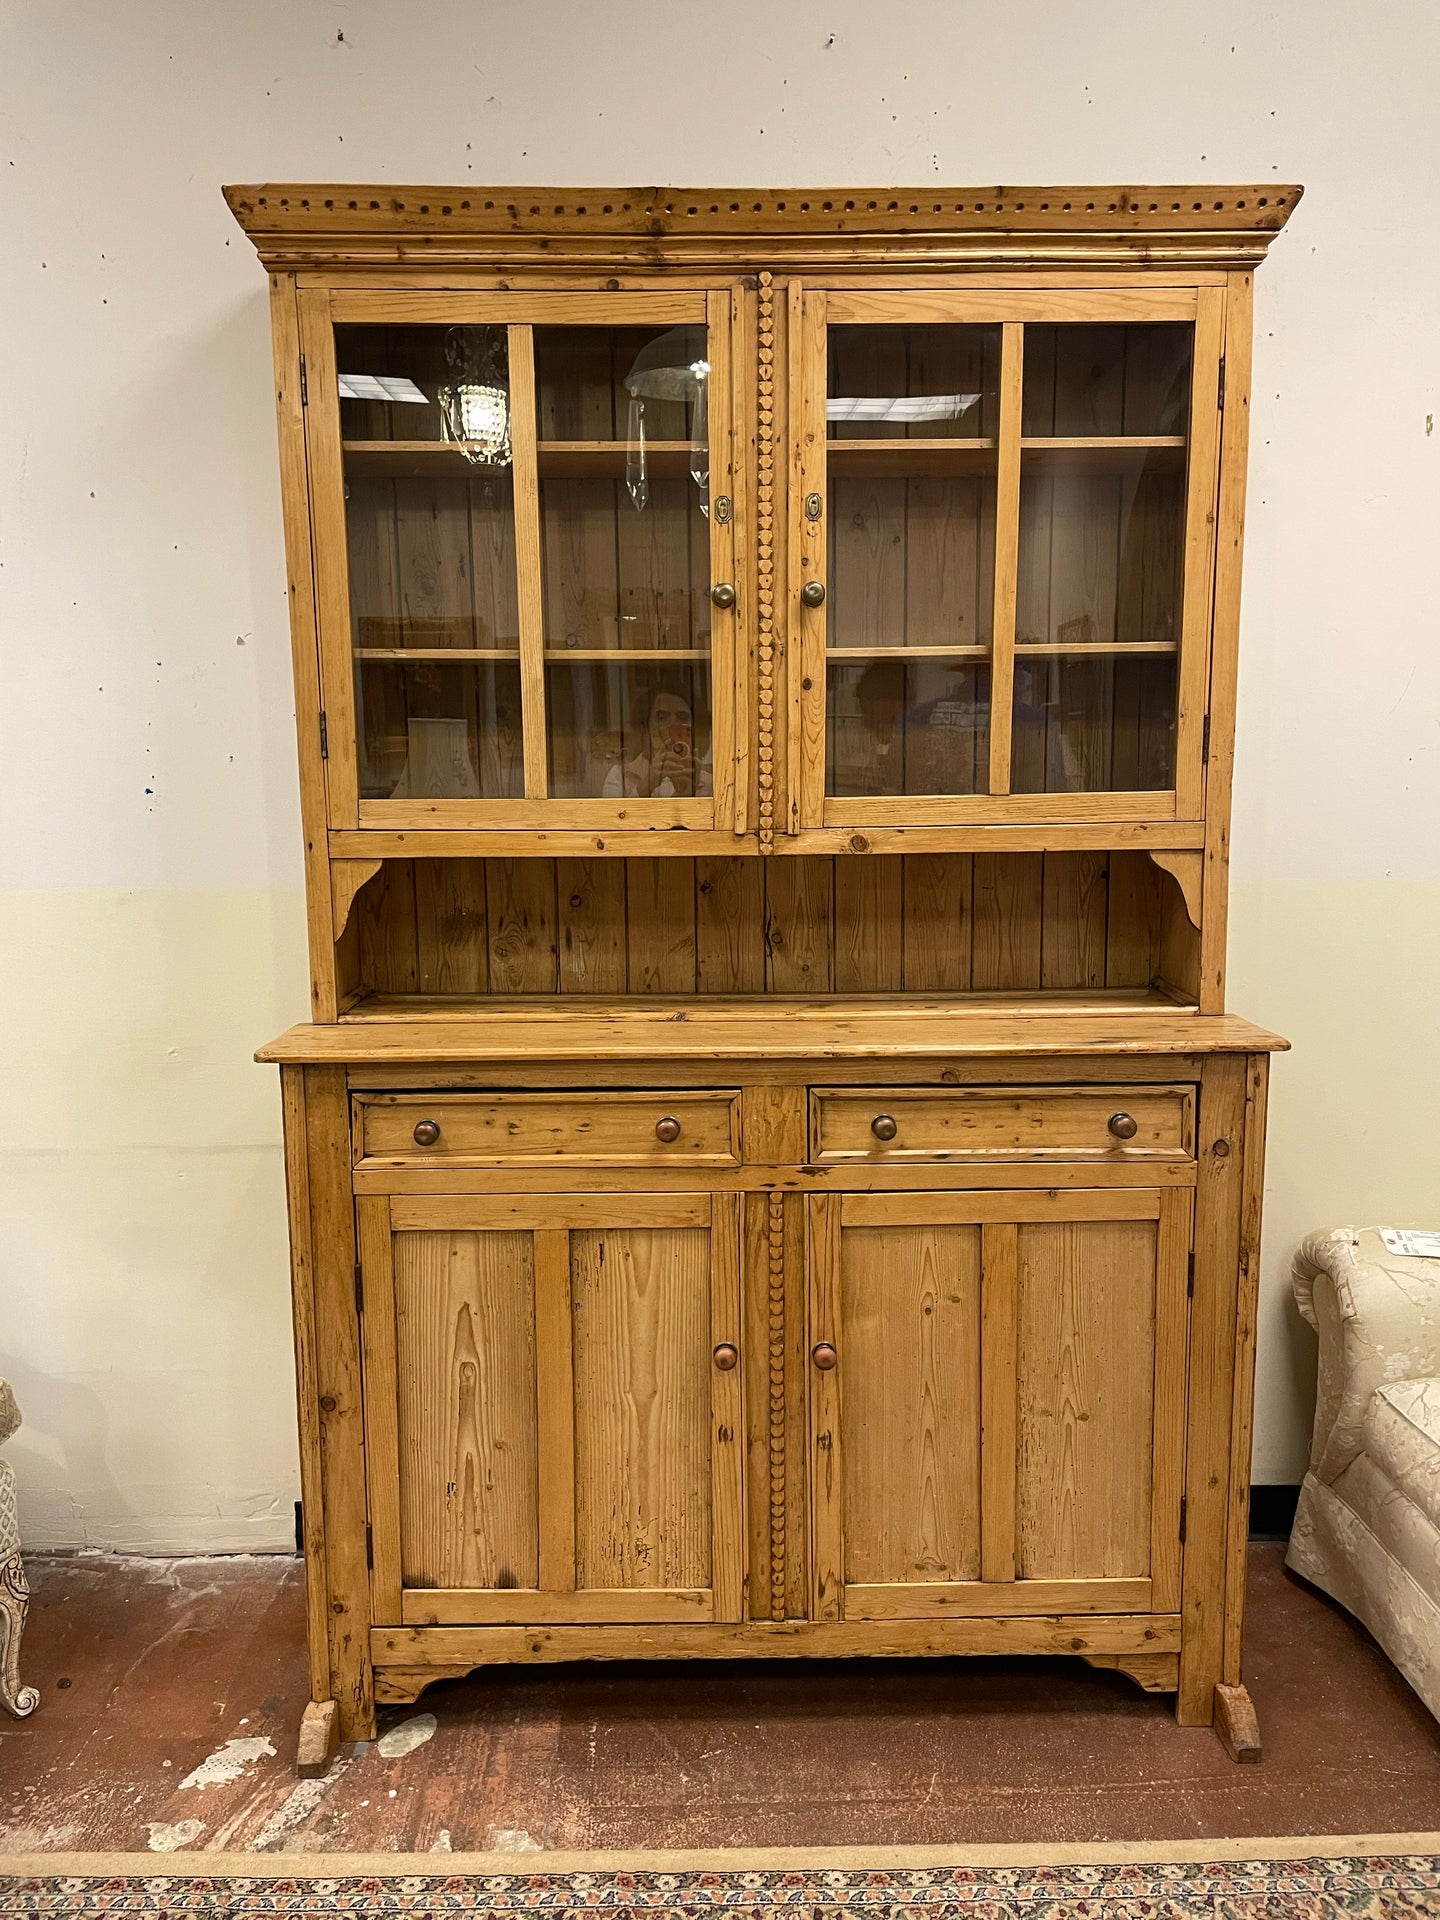 One Piece Antique Pine Cabinet with Glass Doors from Pine Trader Antiques, Montecito. CA